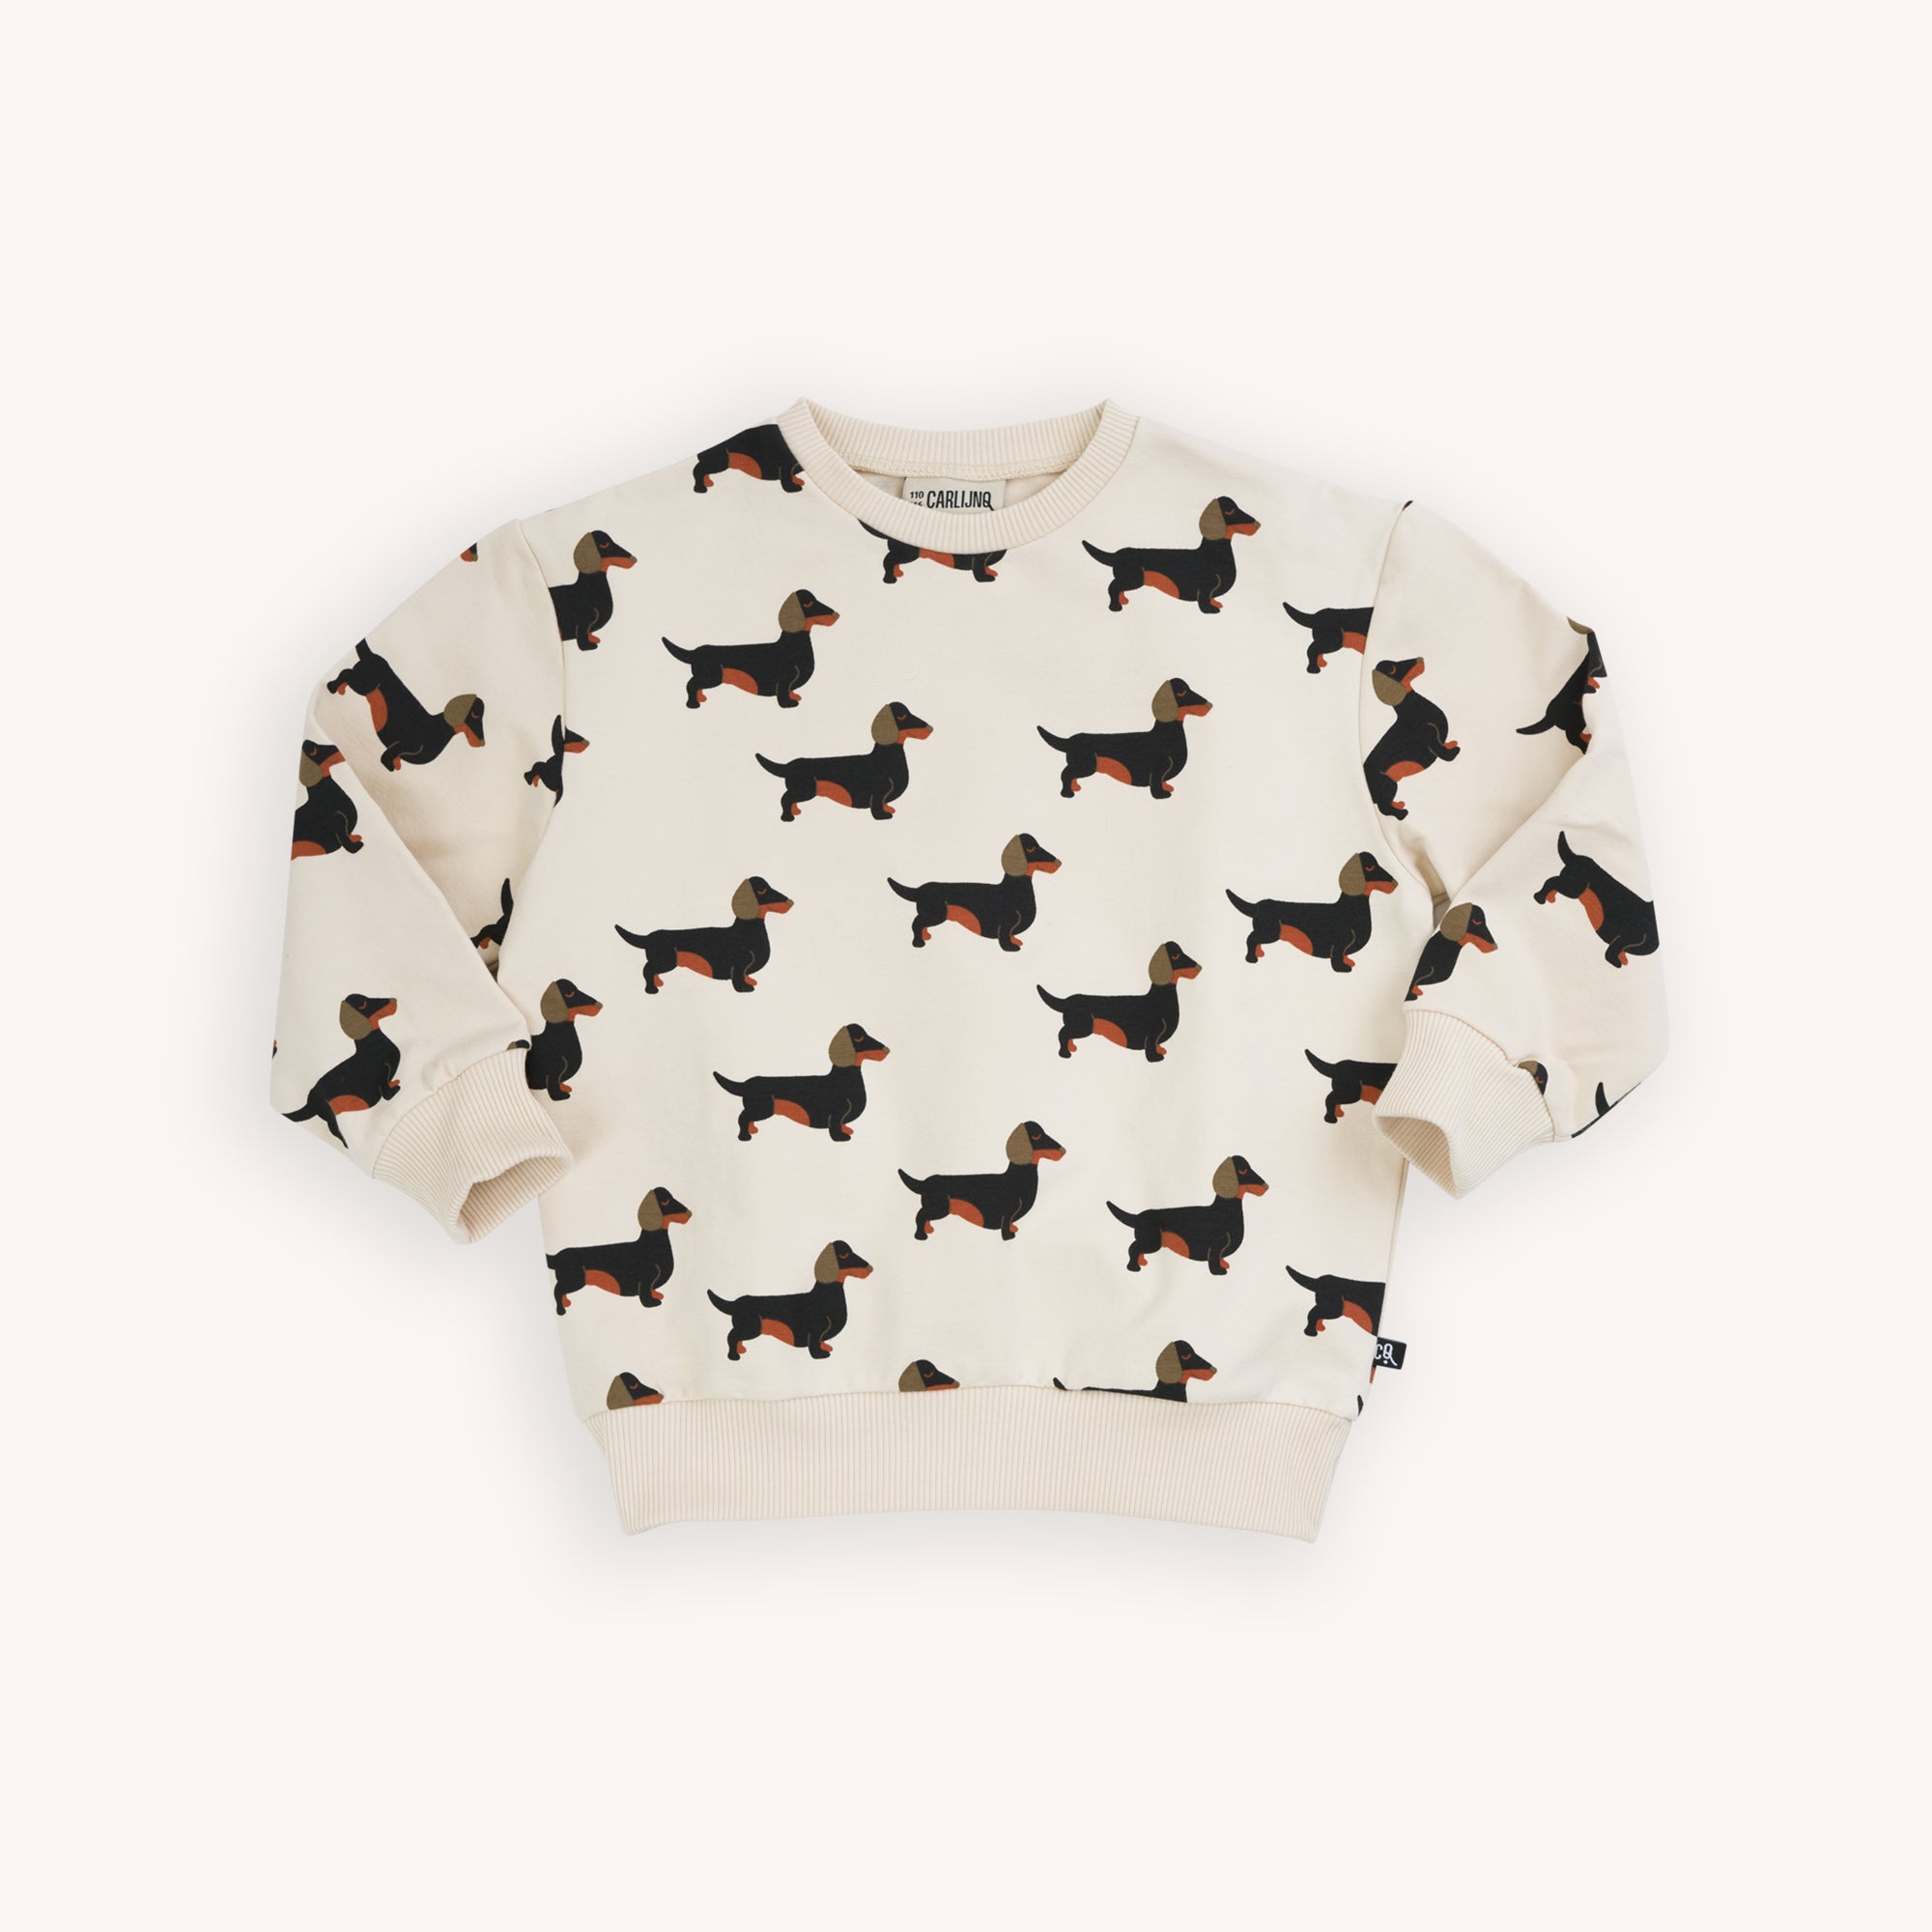 Shop organic cotton kids' clothing and organic cotton kids' sweaters with the coolest dachshund print online in Hong Kong and Singapore at MiliMilu by CalijnQ. This kid's sweater is practical, easy to wear and easy to wash. Most practical kids' and tweens' birthday gifts and also Christmas gifts that will be loved.